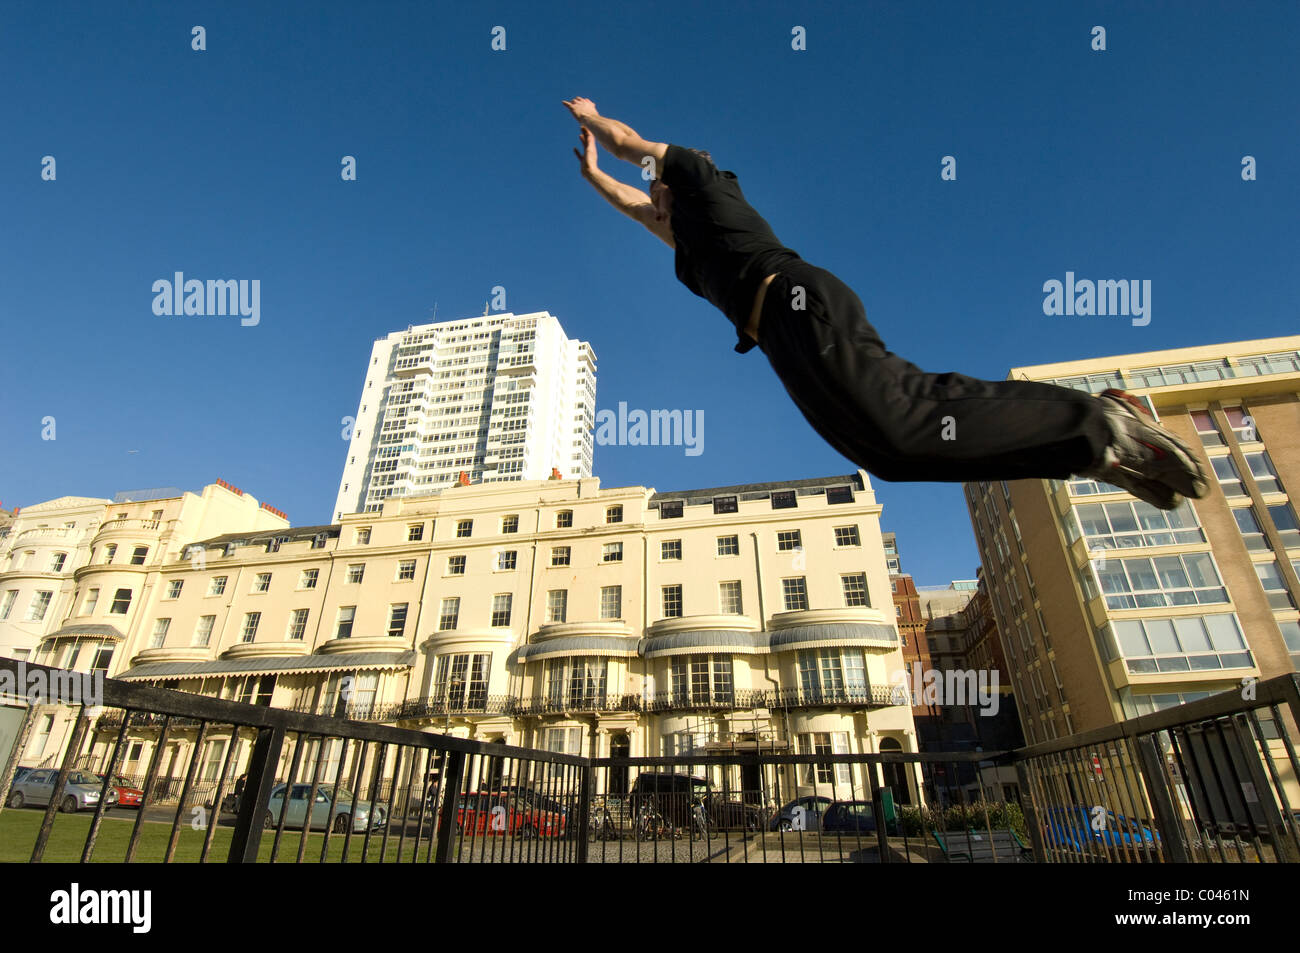 Ben Ockwell practices Parkour, or  FreeRunning, in Regency Square, Brighton, East Sussex, England Britain UK Stock Photo